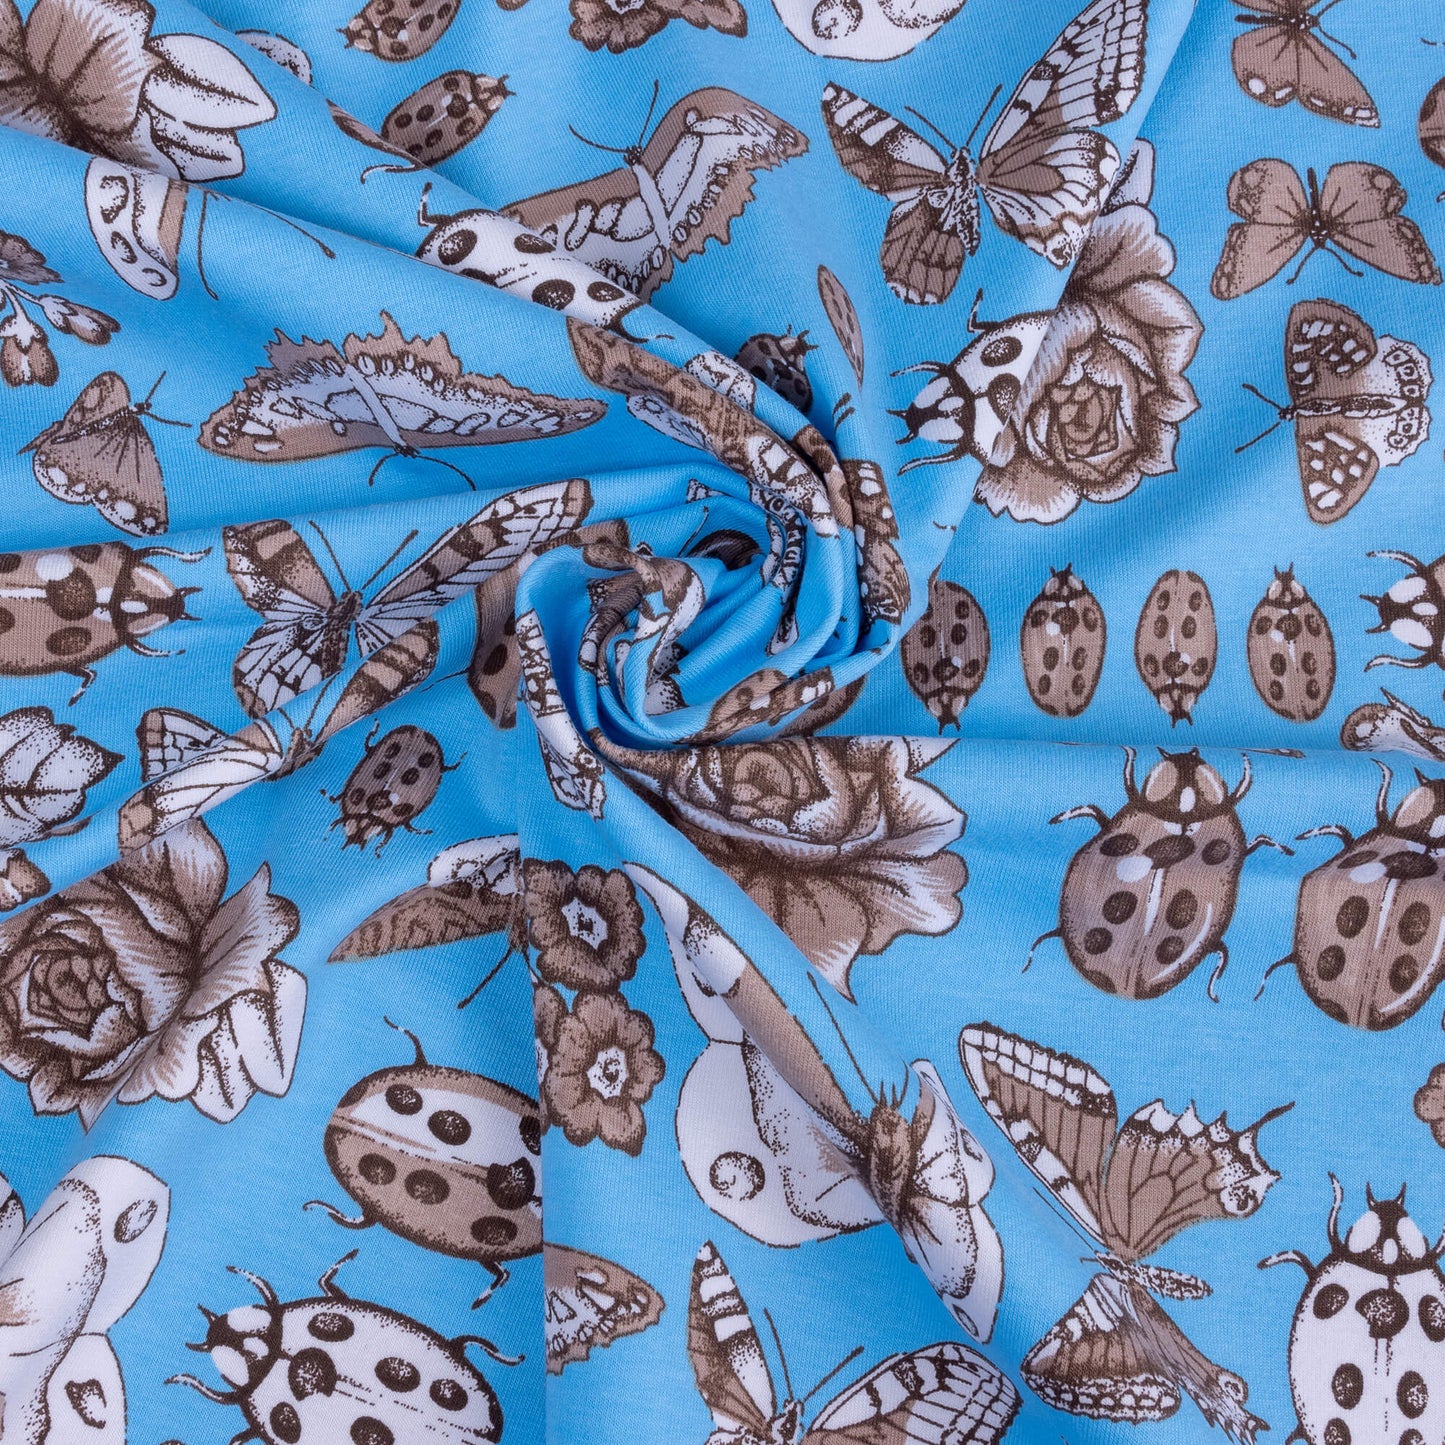 A swirl of stretch jersey fabric featuring sketches of beetles, butterflies, florals and bugs on a light blue bright background